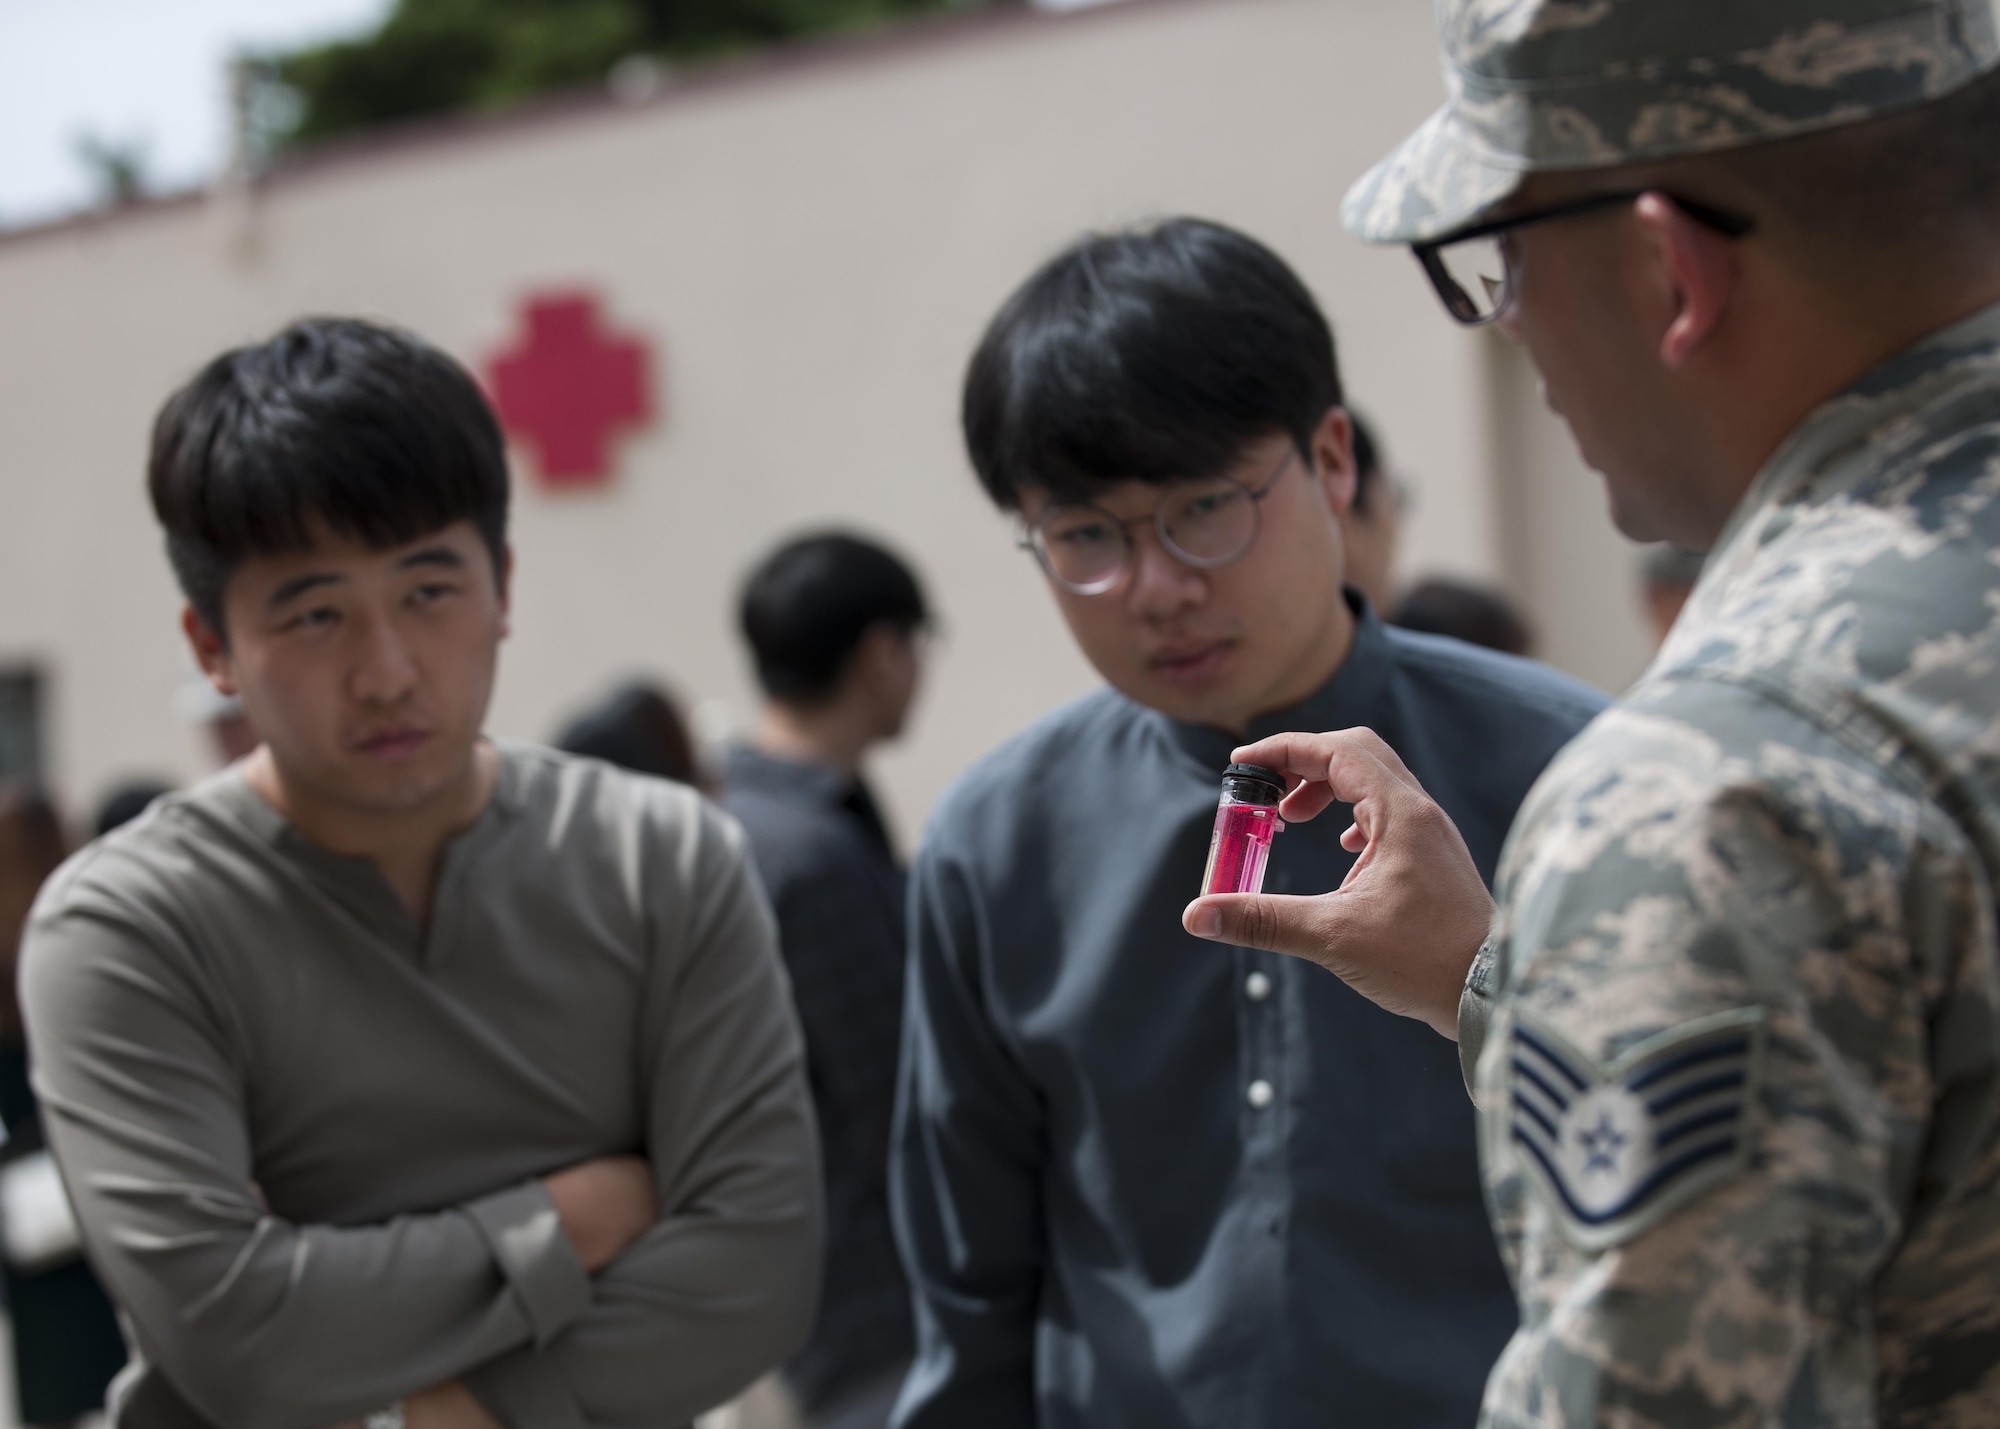 U.S. Air Force Staff Sgt. Hector Mendez-Chaves, 8th Medical Group Bioenvironmental Engineering health operations NCOIC, shows what happens when water is tested on base to environmental engineering students from Kunsan National University during a tour at Kunsan Air Base, Republic of Korea, Sept. 29, 2017. During the tour, students where taught about the correlation between the environment and health and what the 8th MDG is doing to minimize risks to the Airmen and civilians on base. (U.S. Air Force photo by Staff Sgt. Victoria H. Taylor)